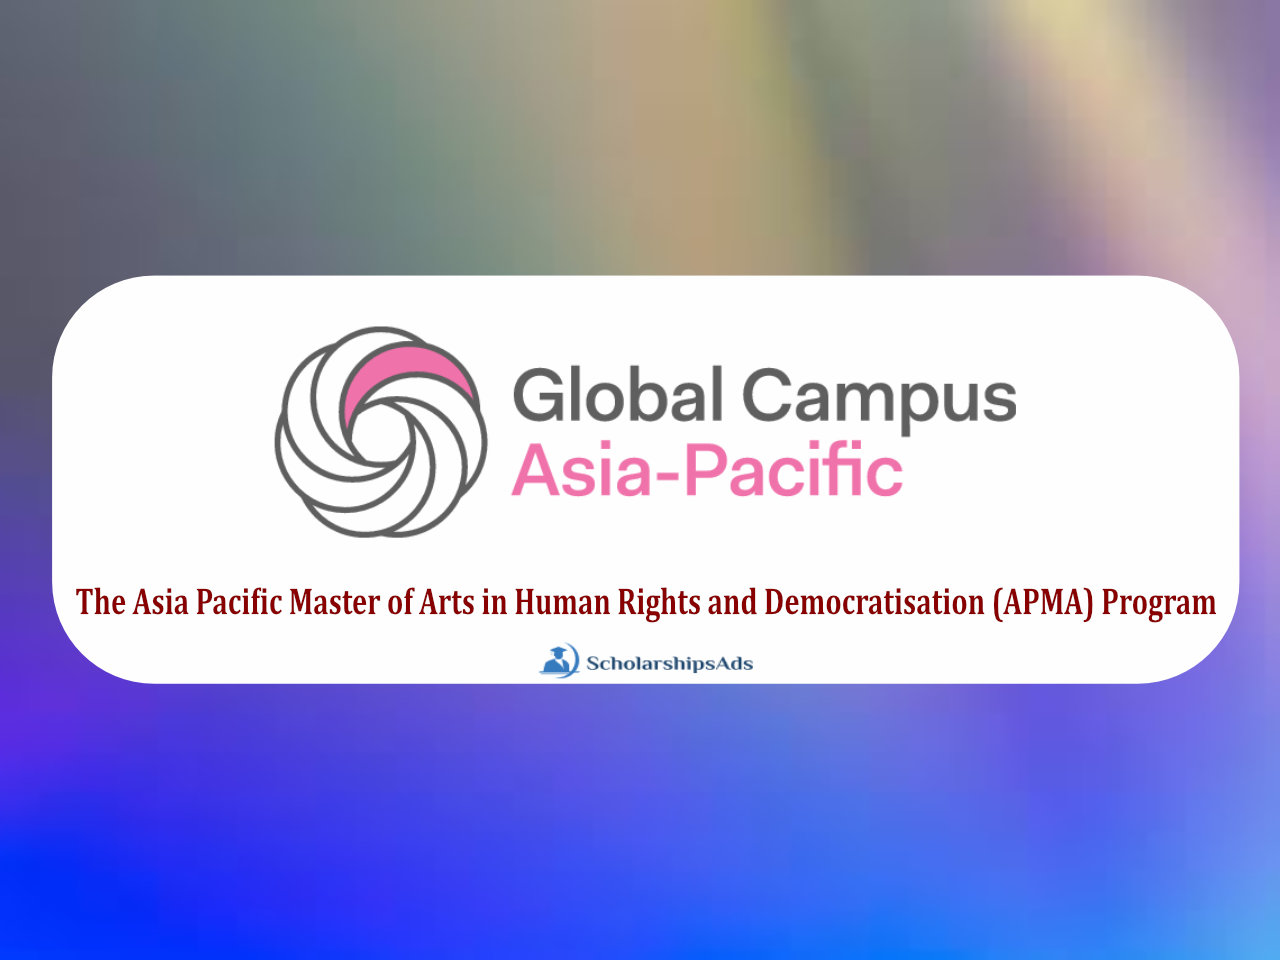 The Asia Pacific Master of Arts in Human Rights and Democratisation (APMA) Program 2022